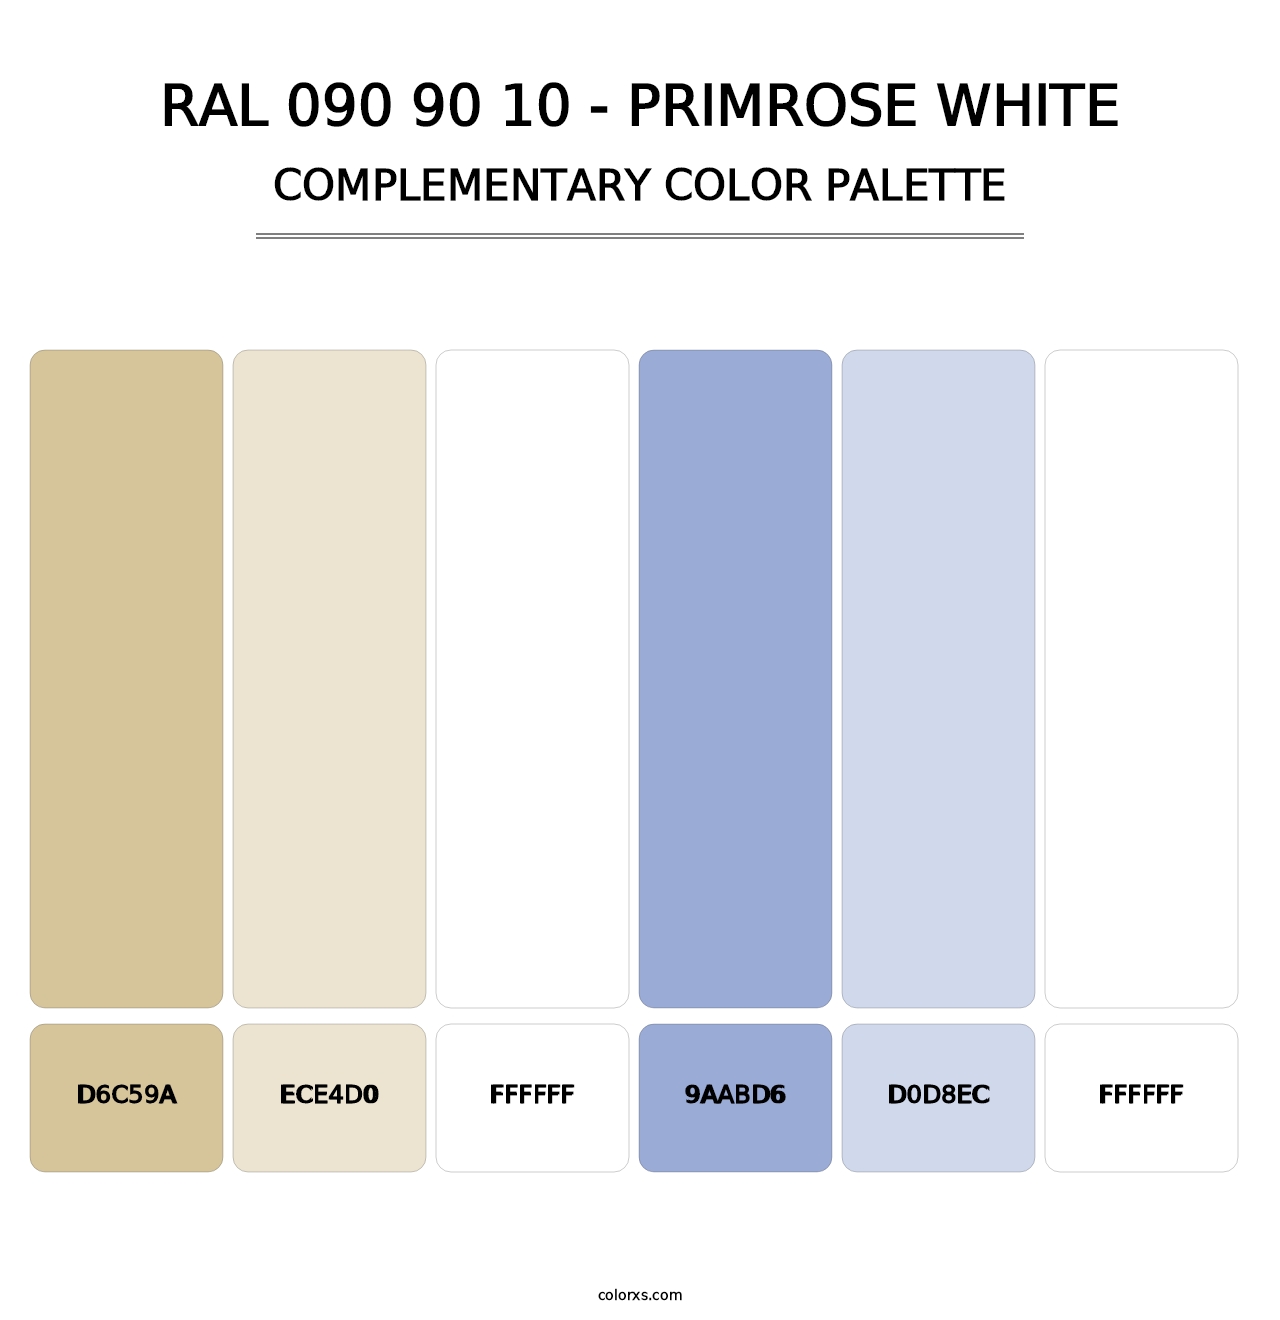 RAL 090 90 10 - Primrose White - Complementary Color Palette